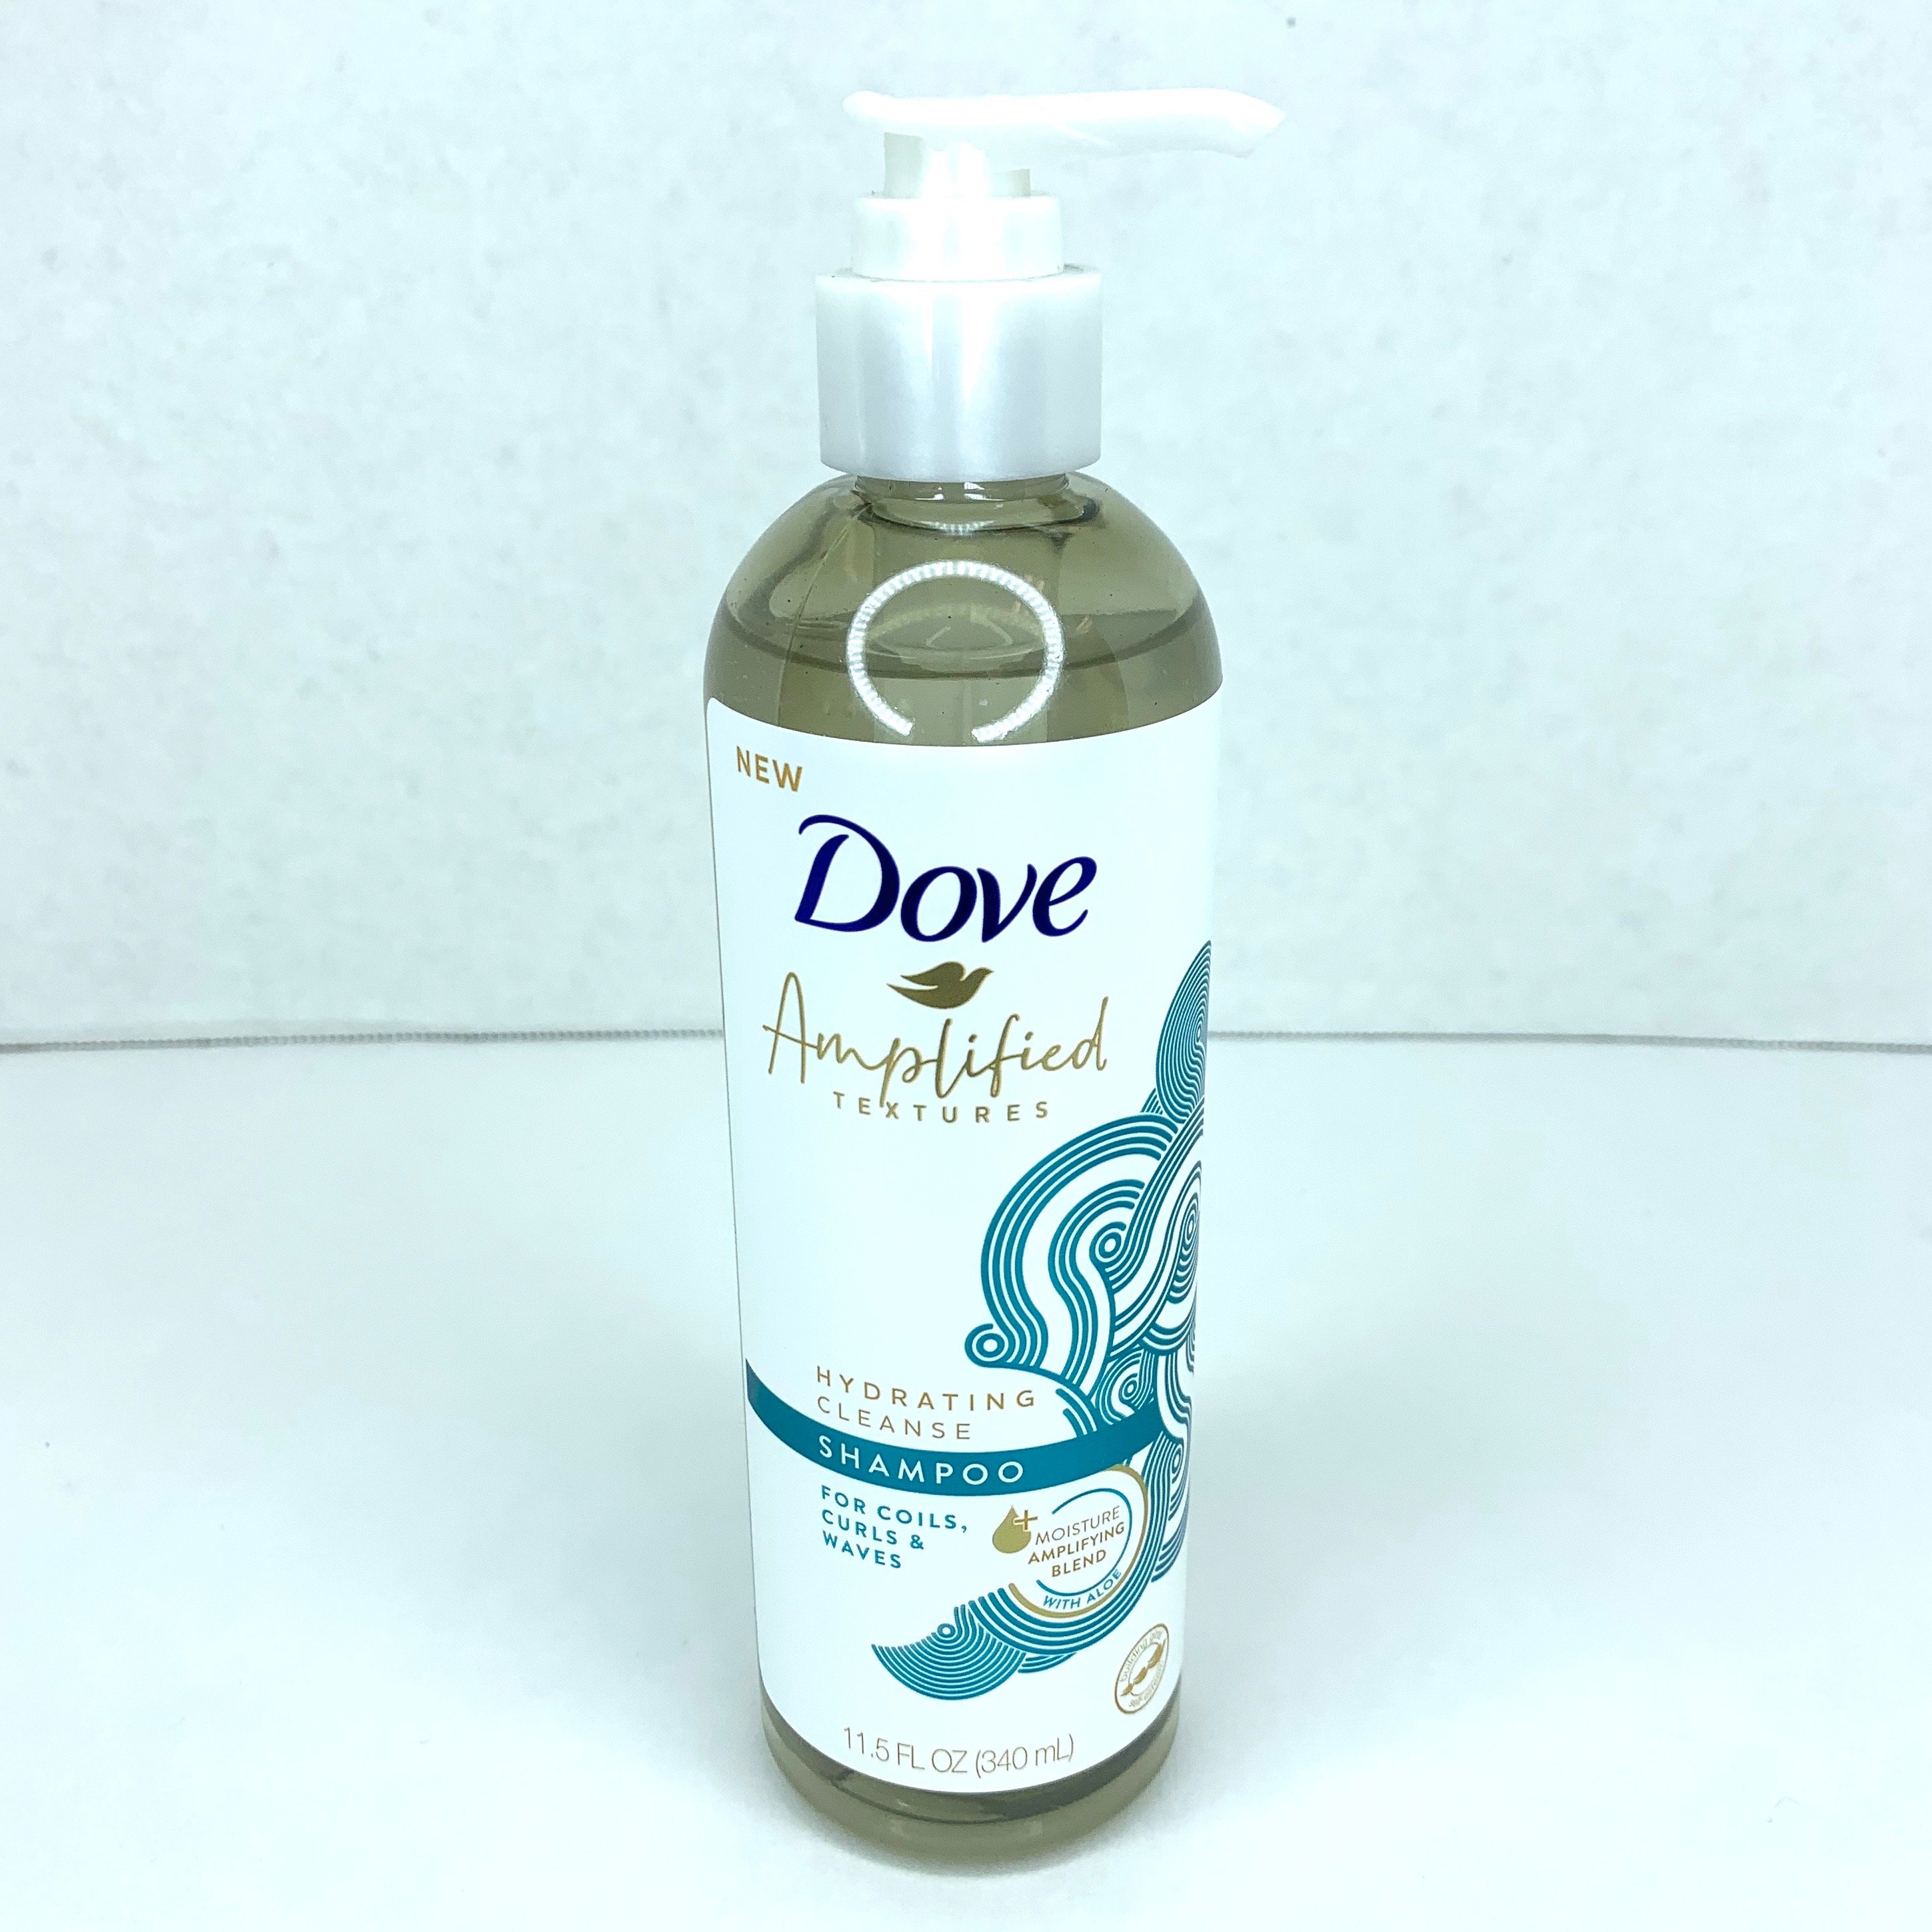 Dove Amplified Textures Hydrating Cleanse Shampoo Front for Cocotique May 2020